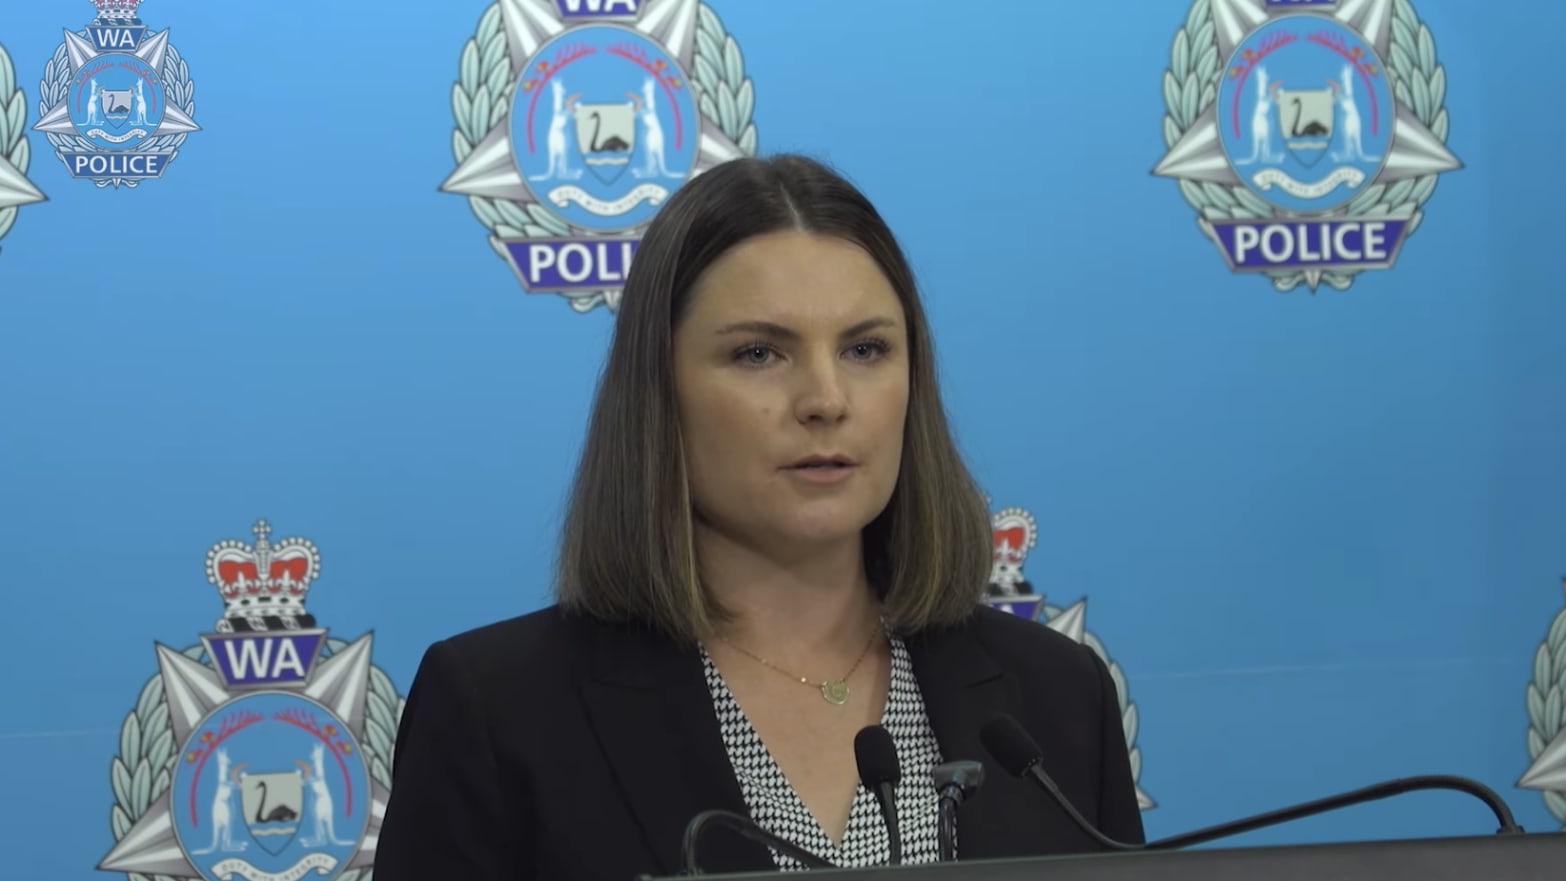 Chloe White of the Western Australia Police Force provides details on the arrest of Gavin Jeffery Durbridge, an alleged child rapist who was court after police investigative genetic genealogy techniques. 